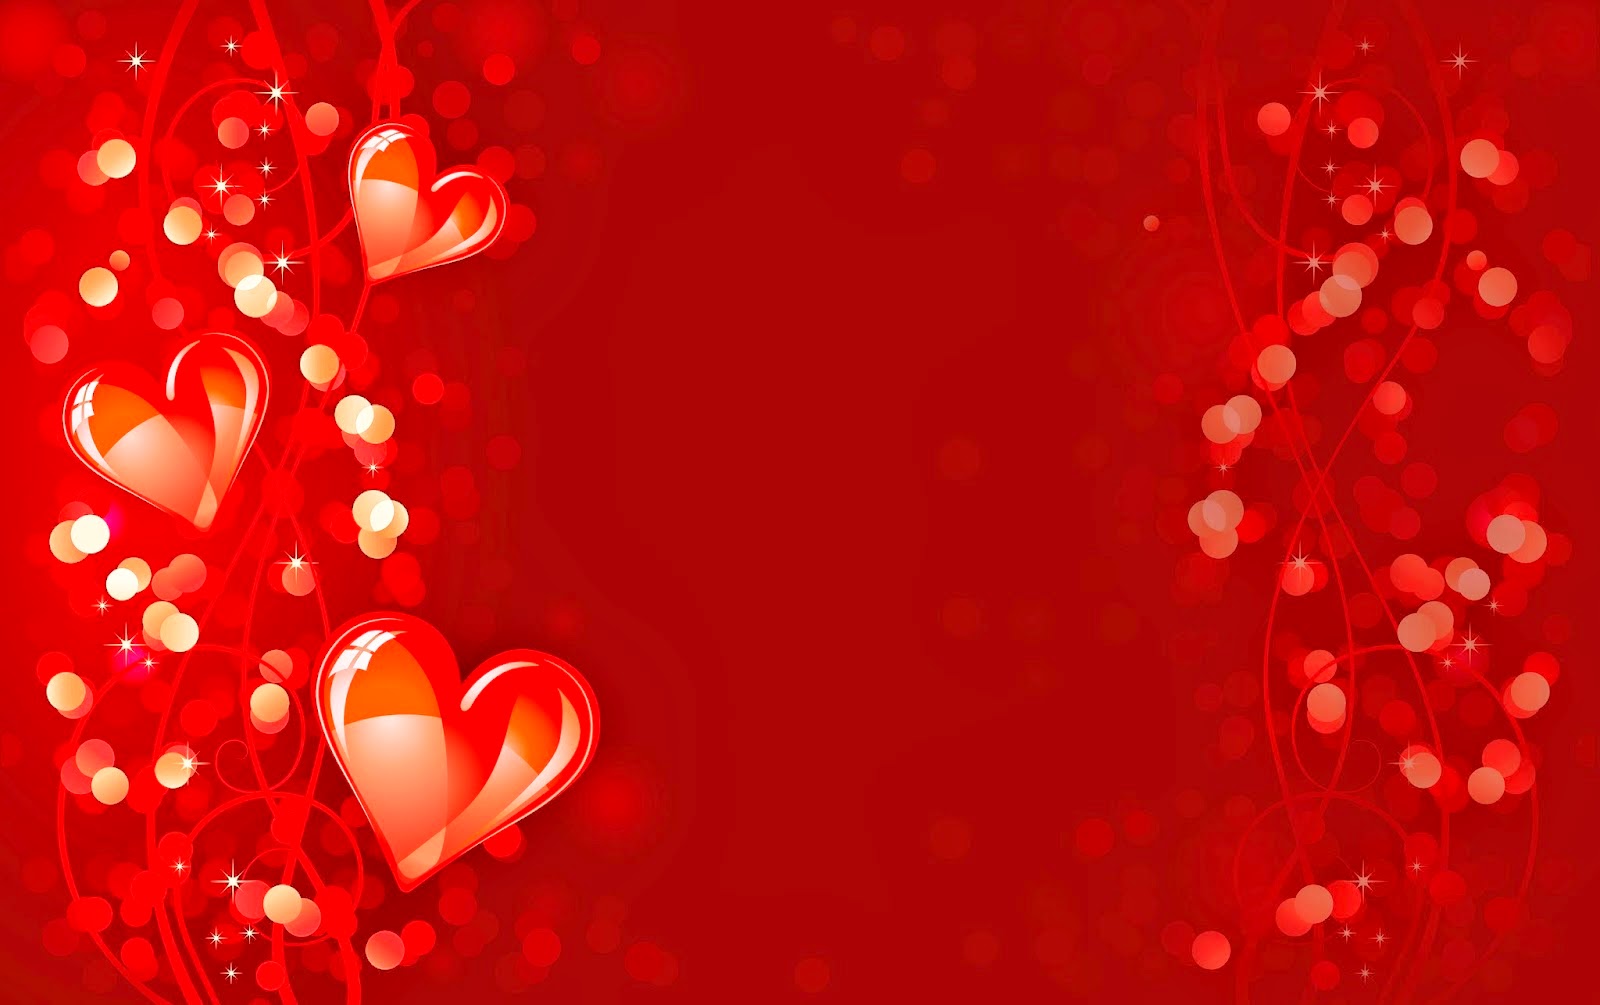 status and wallpaper,red,heart,valentine's day,love,holiday